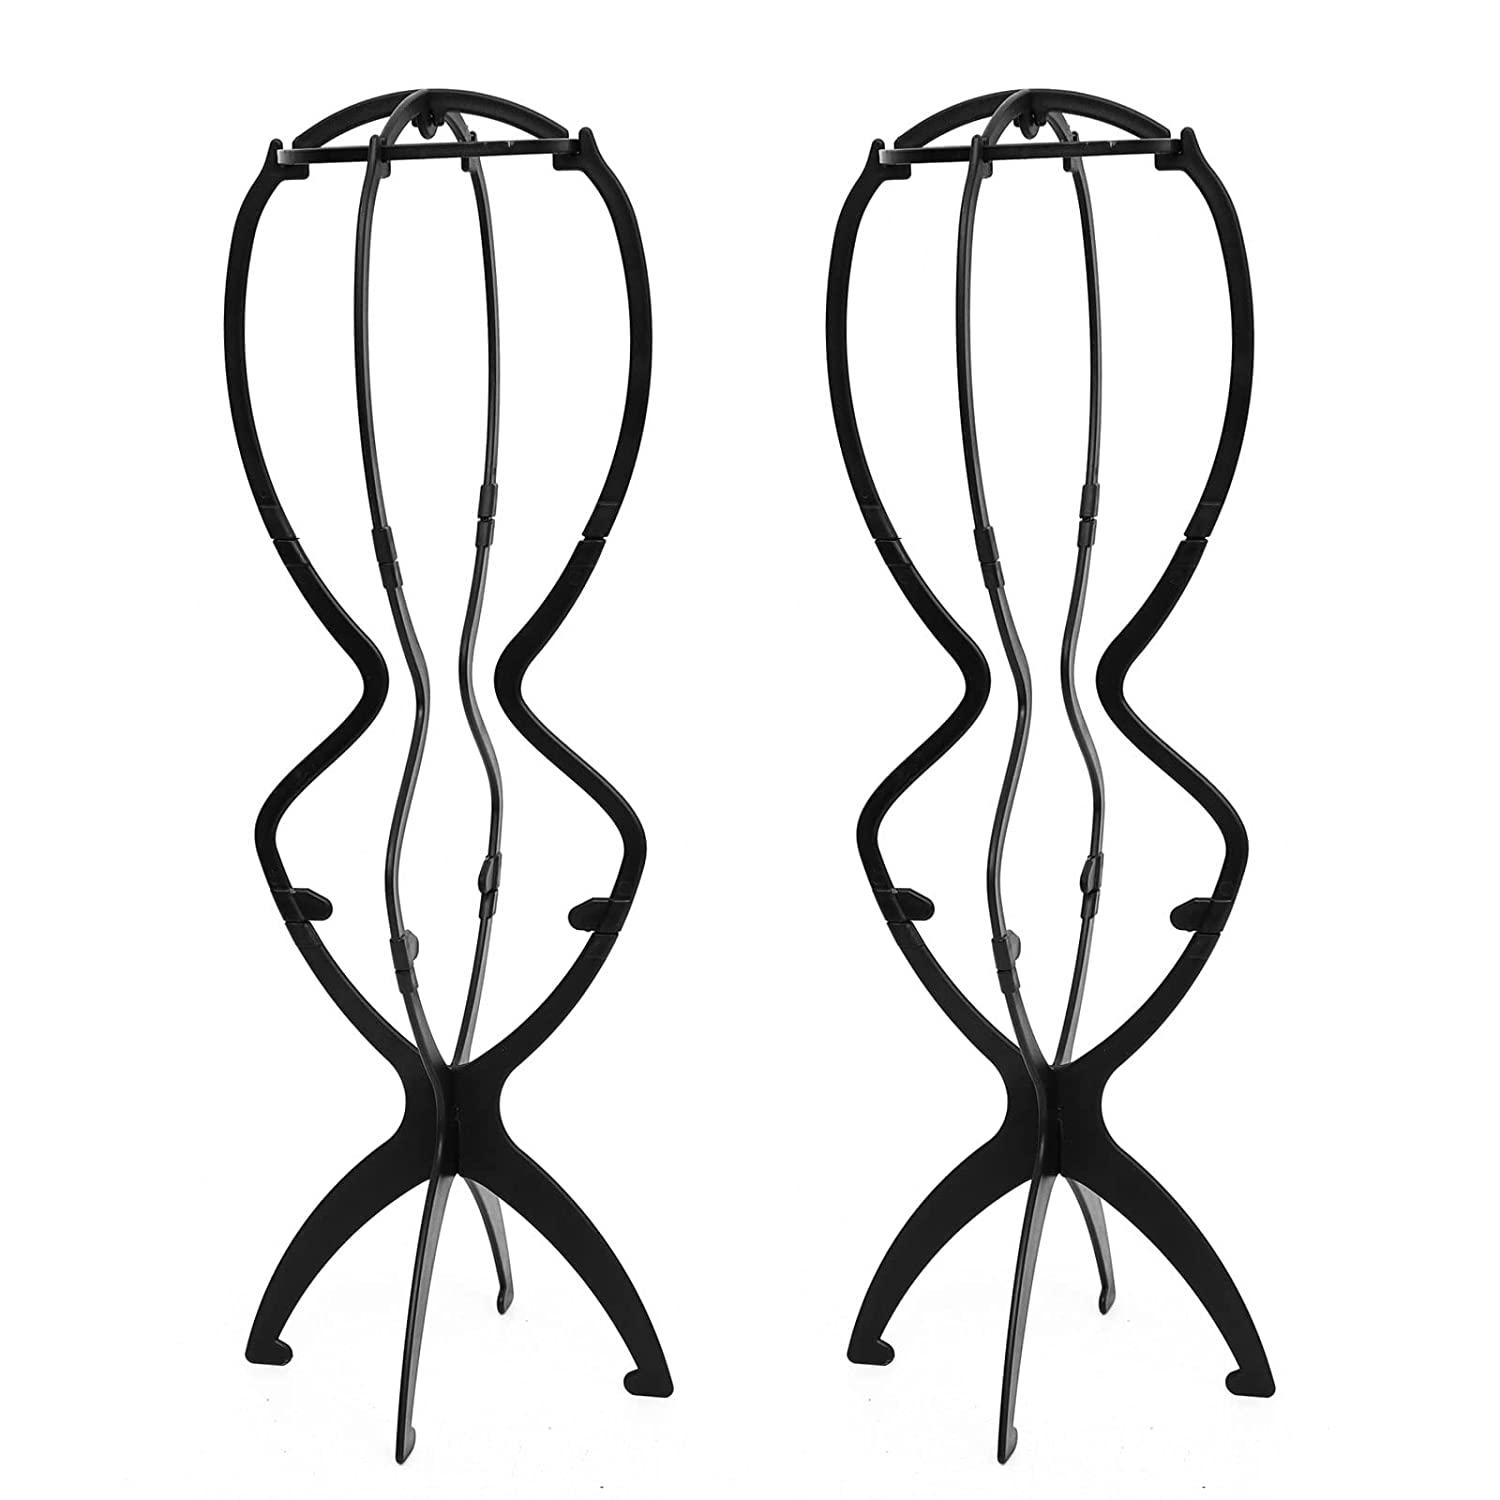 PIESOYRI Tall Wig Stands, Wig Head Stand for Long Wigs, 2 Pack, 19.7,  Portable Collapsible Wig Holders Foldable Wig Stand 19.7-2PCS